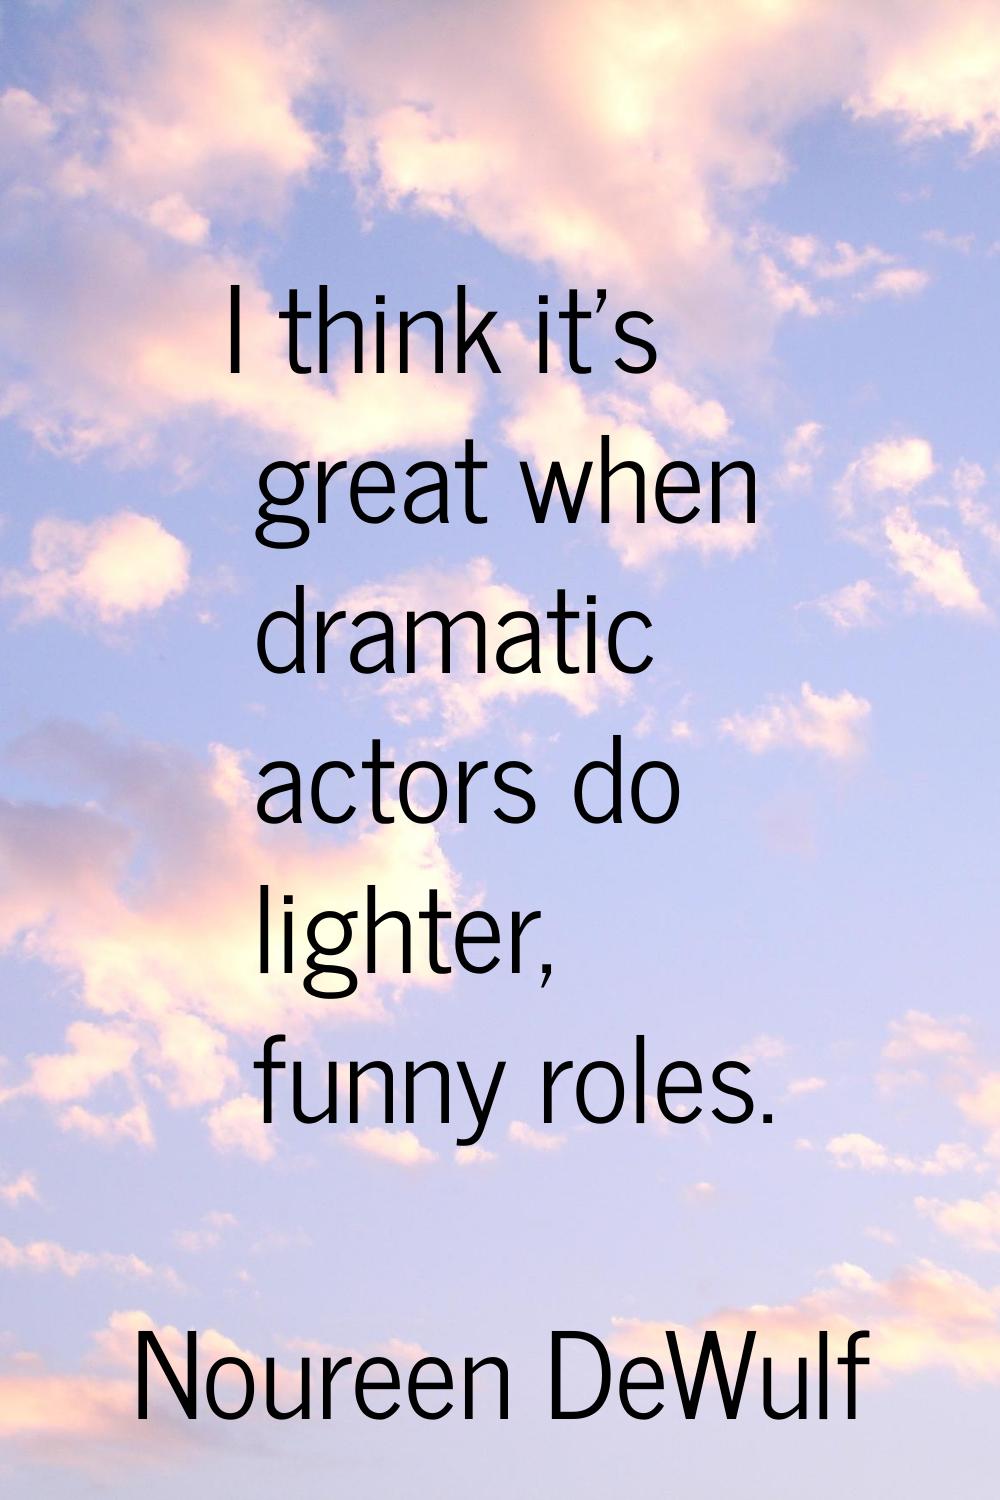 I think it's great when dramatic actors do lighter, funny roles.